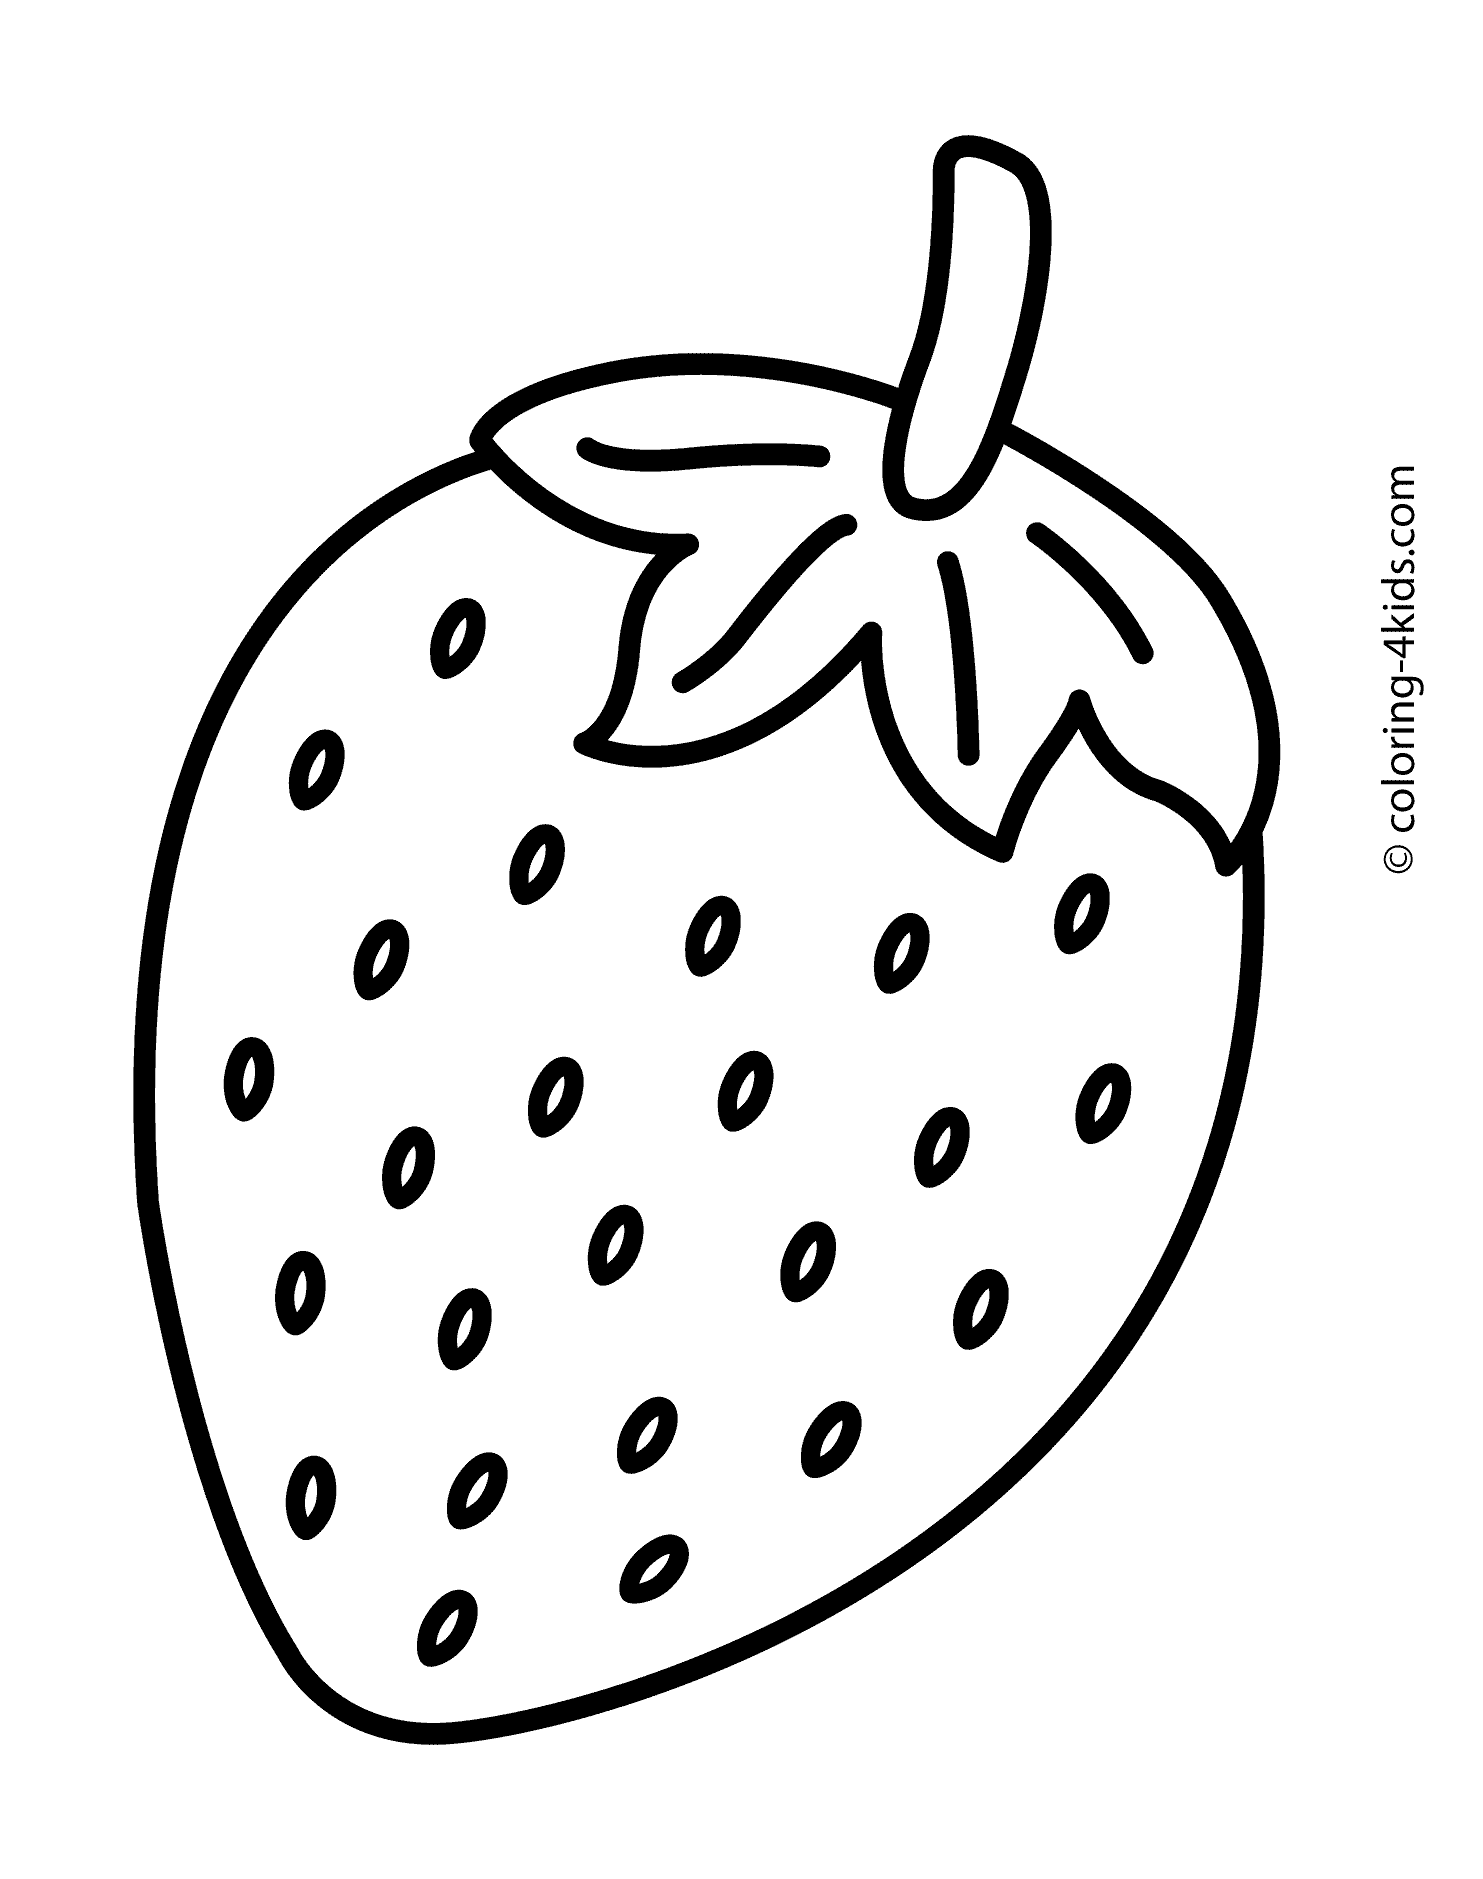 1000+ images about Fruits, berries and vegetables coloring pages ...